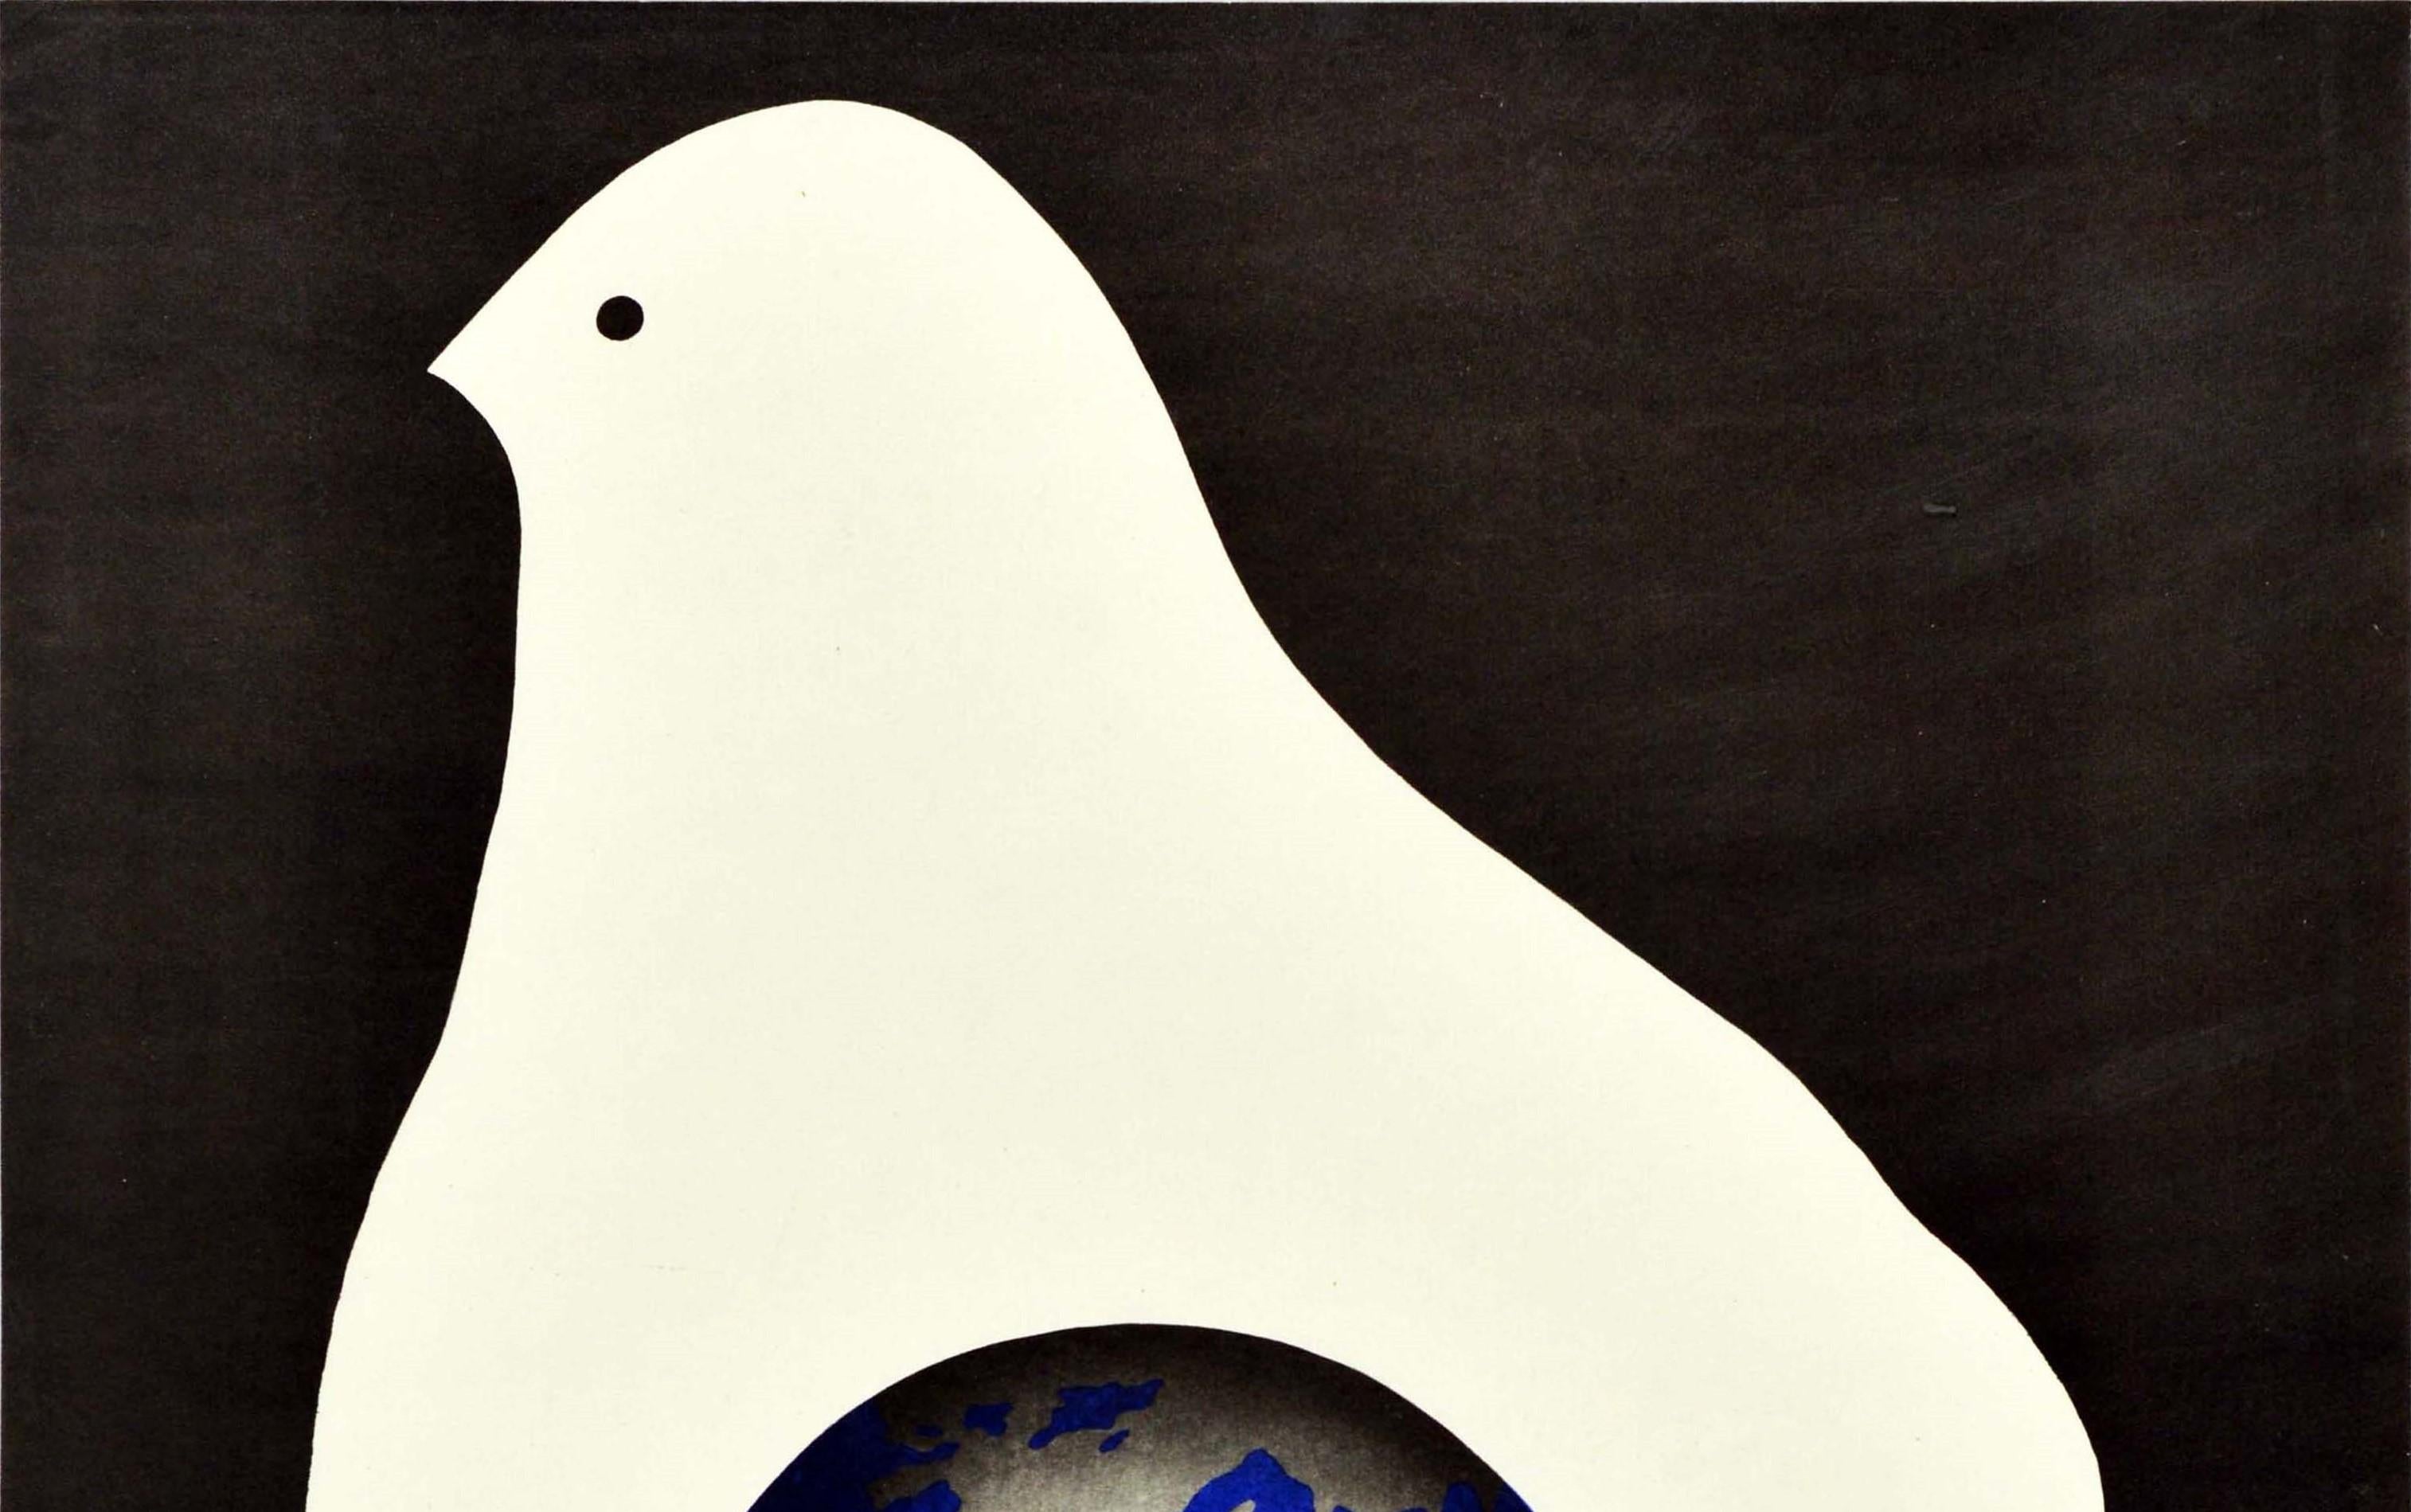 Original vintage Soviet propaganda poster featuring an illustration of a hand in white forming the shape of a peace dove holding planet Earth against a black background, the text below in white lettering - ??? ???? ???? ? ??????? / Peace is